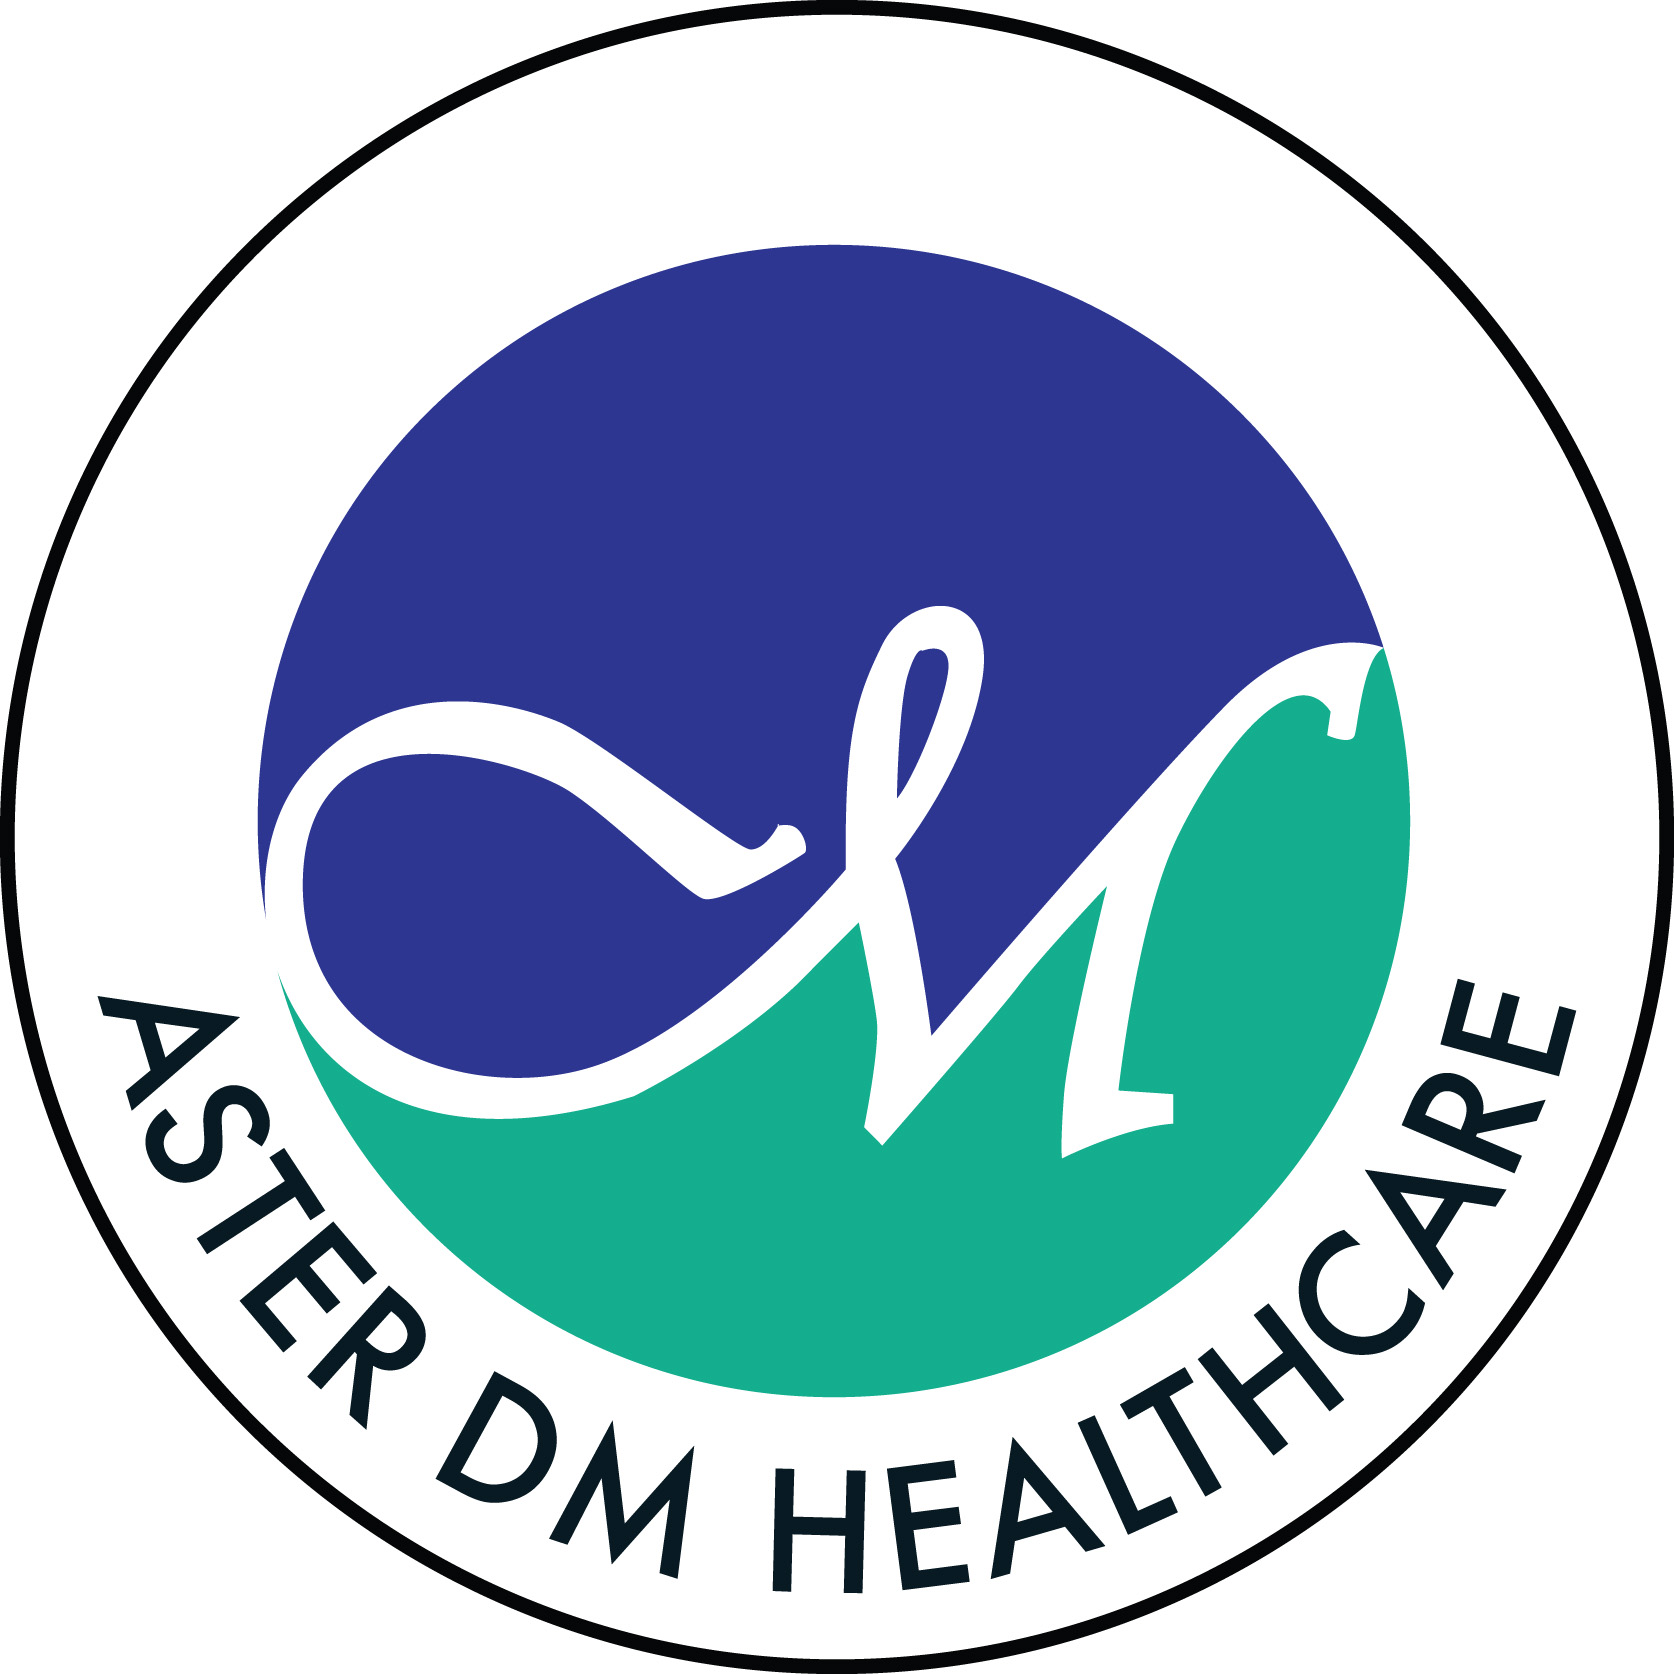 Over 100 Aster DM Healthcare Doctors from GCC to provide free tele-consultation services to Covid-19 patients and caregivers in India